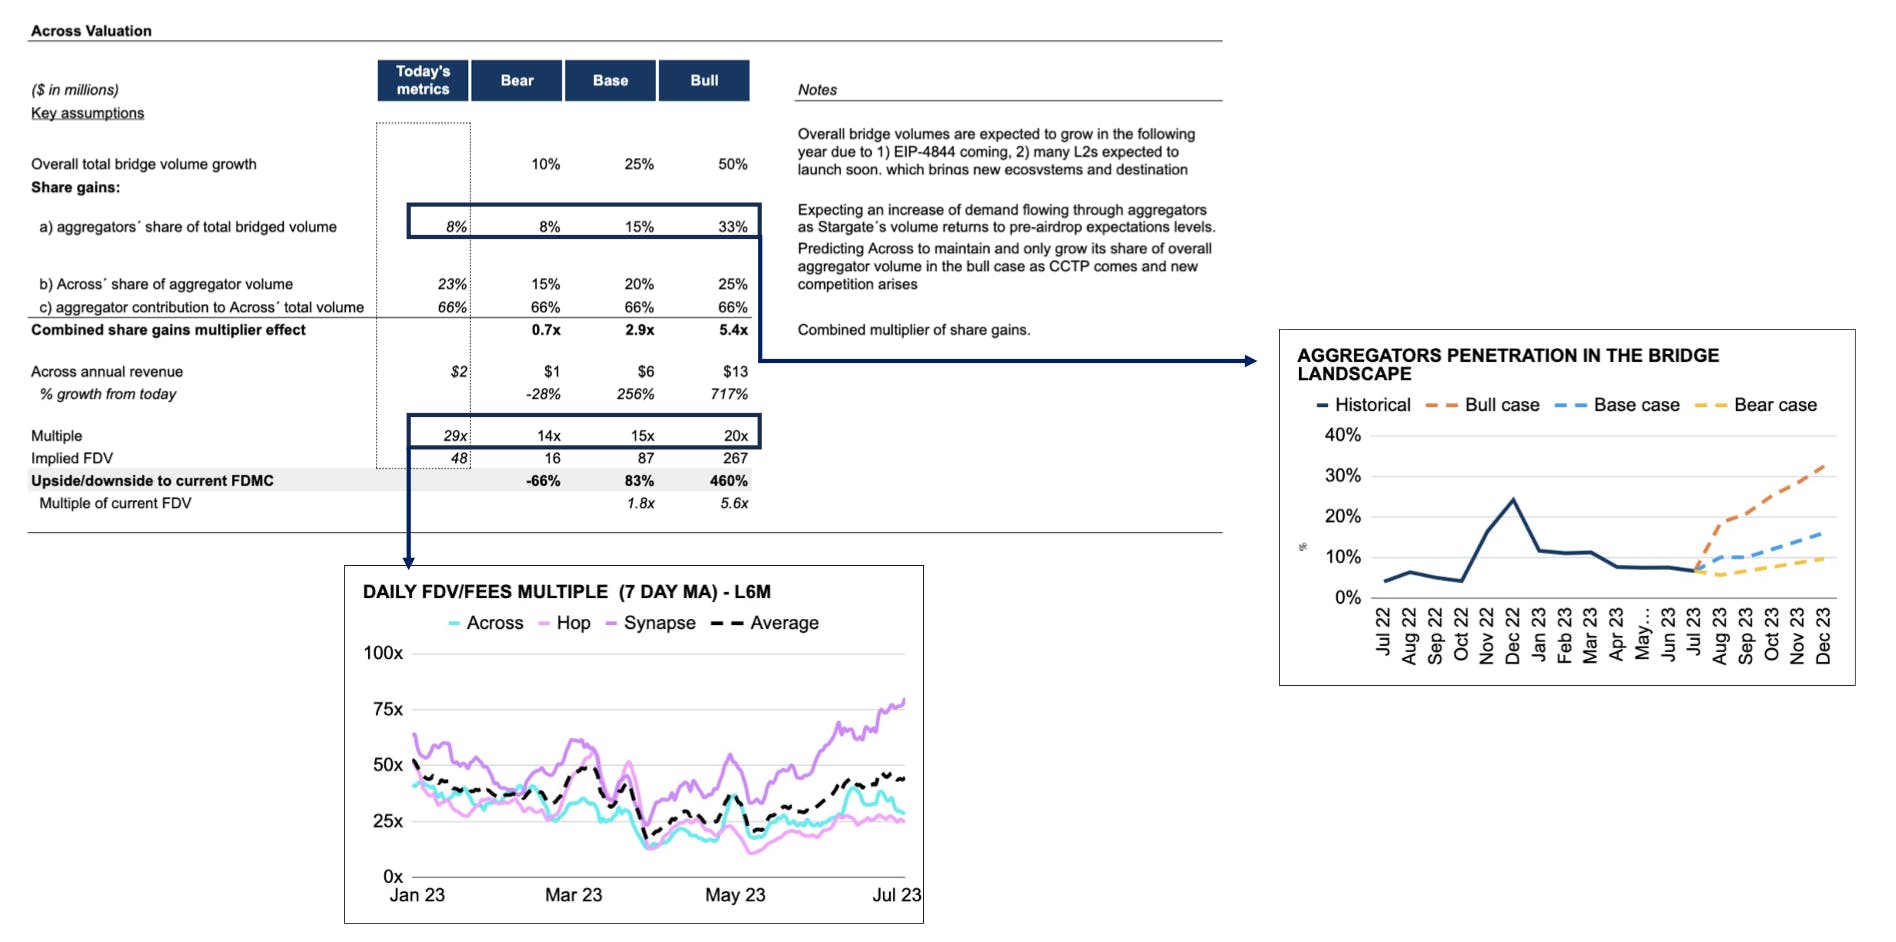 Absolute Valuation: Based on overall TAM growth, aggregator penetration and share gains 